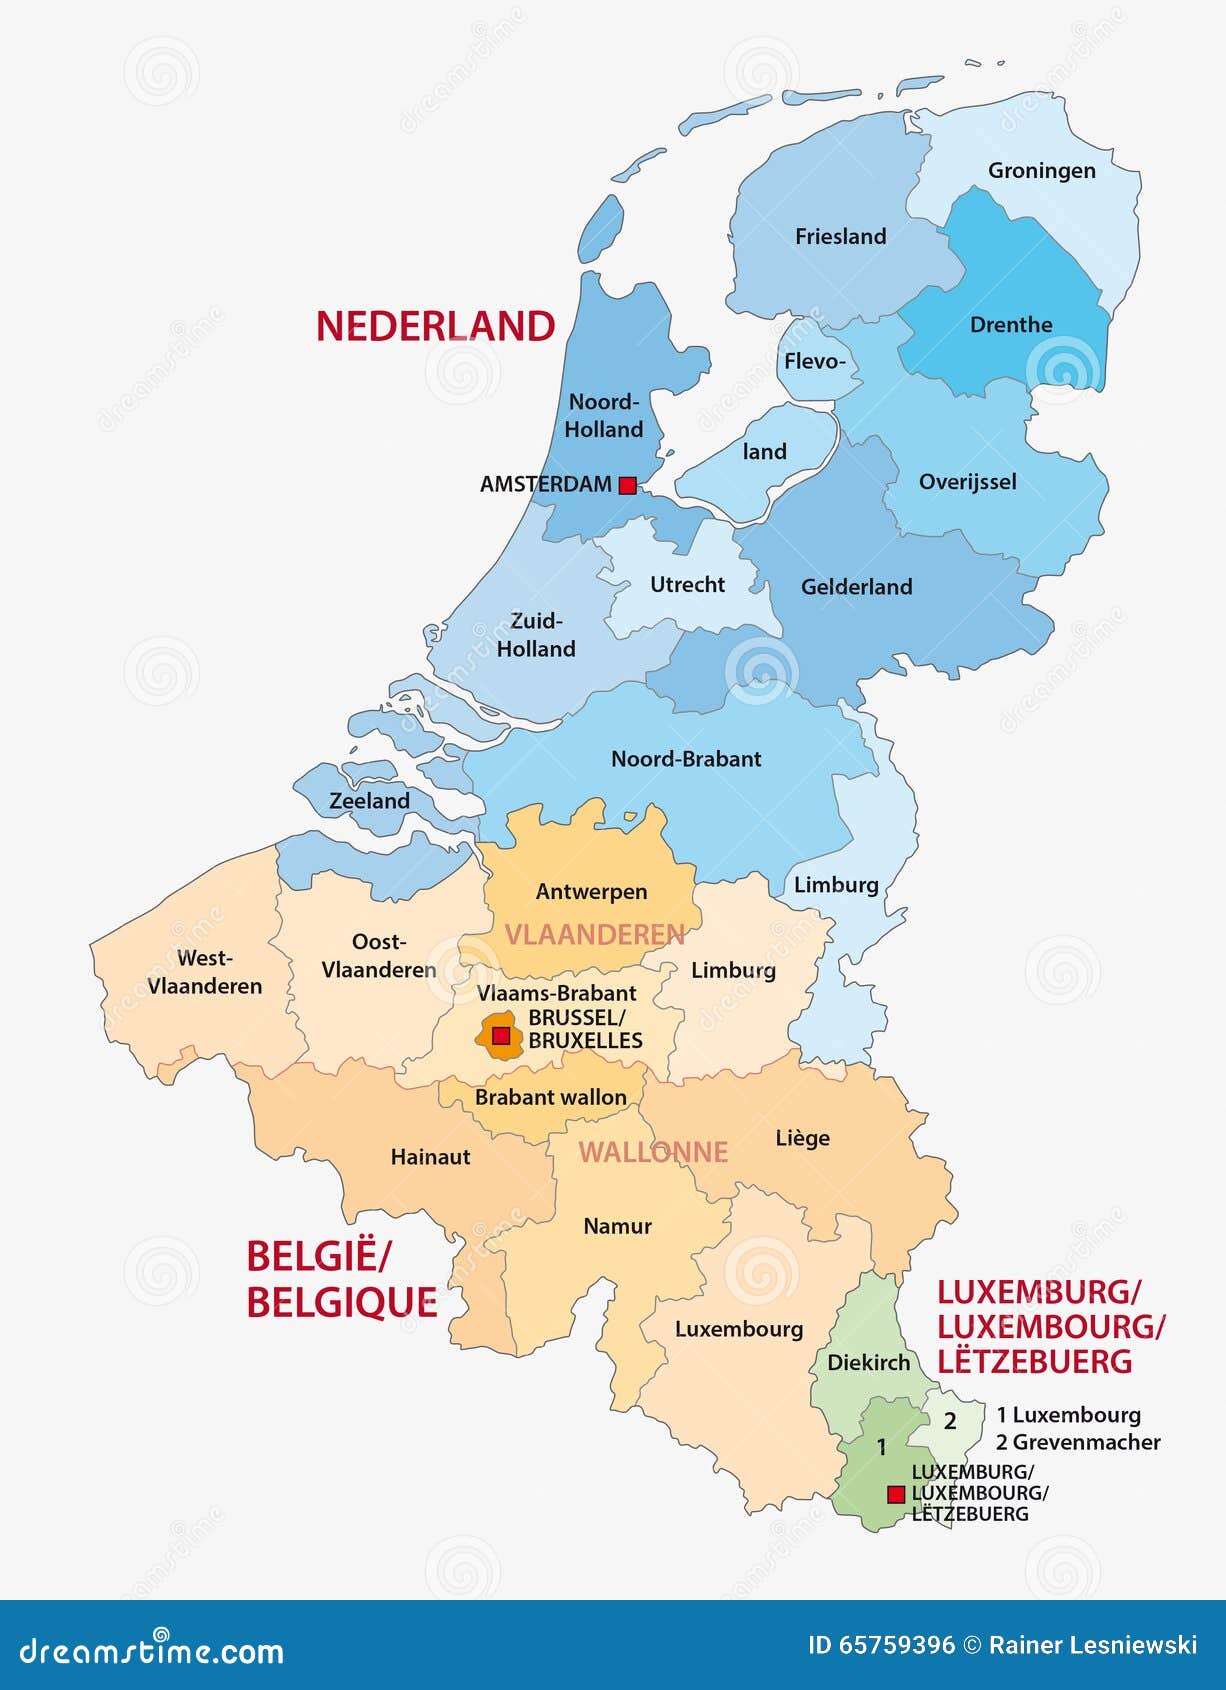 List 96+ Images belgium, netherlands, and luxembourg make up the benelux countries Stunning